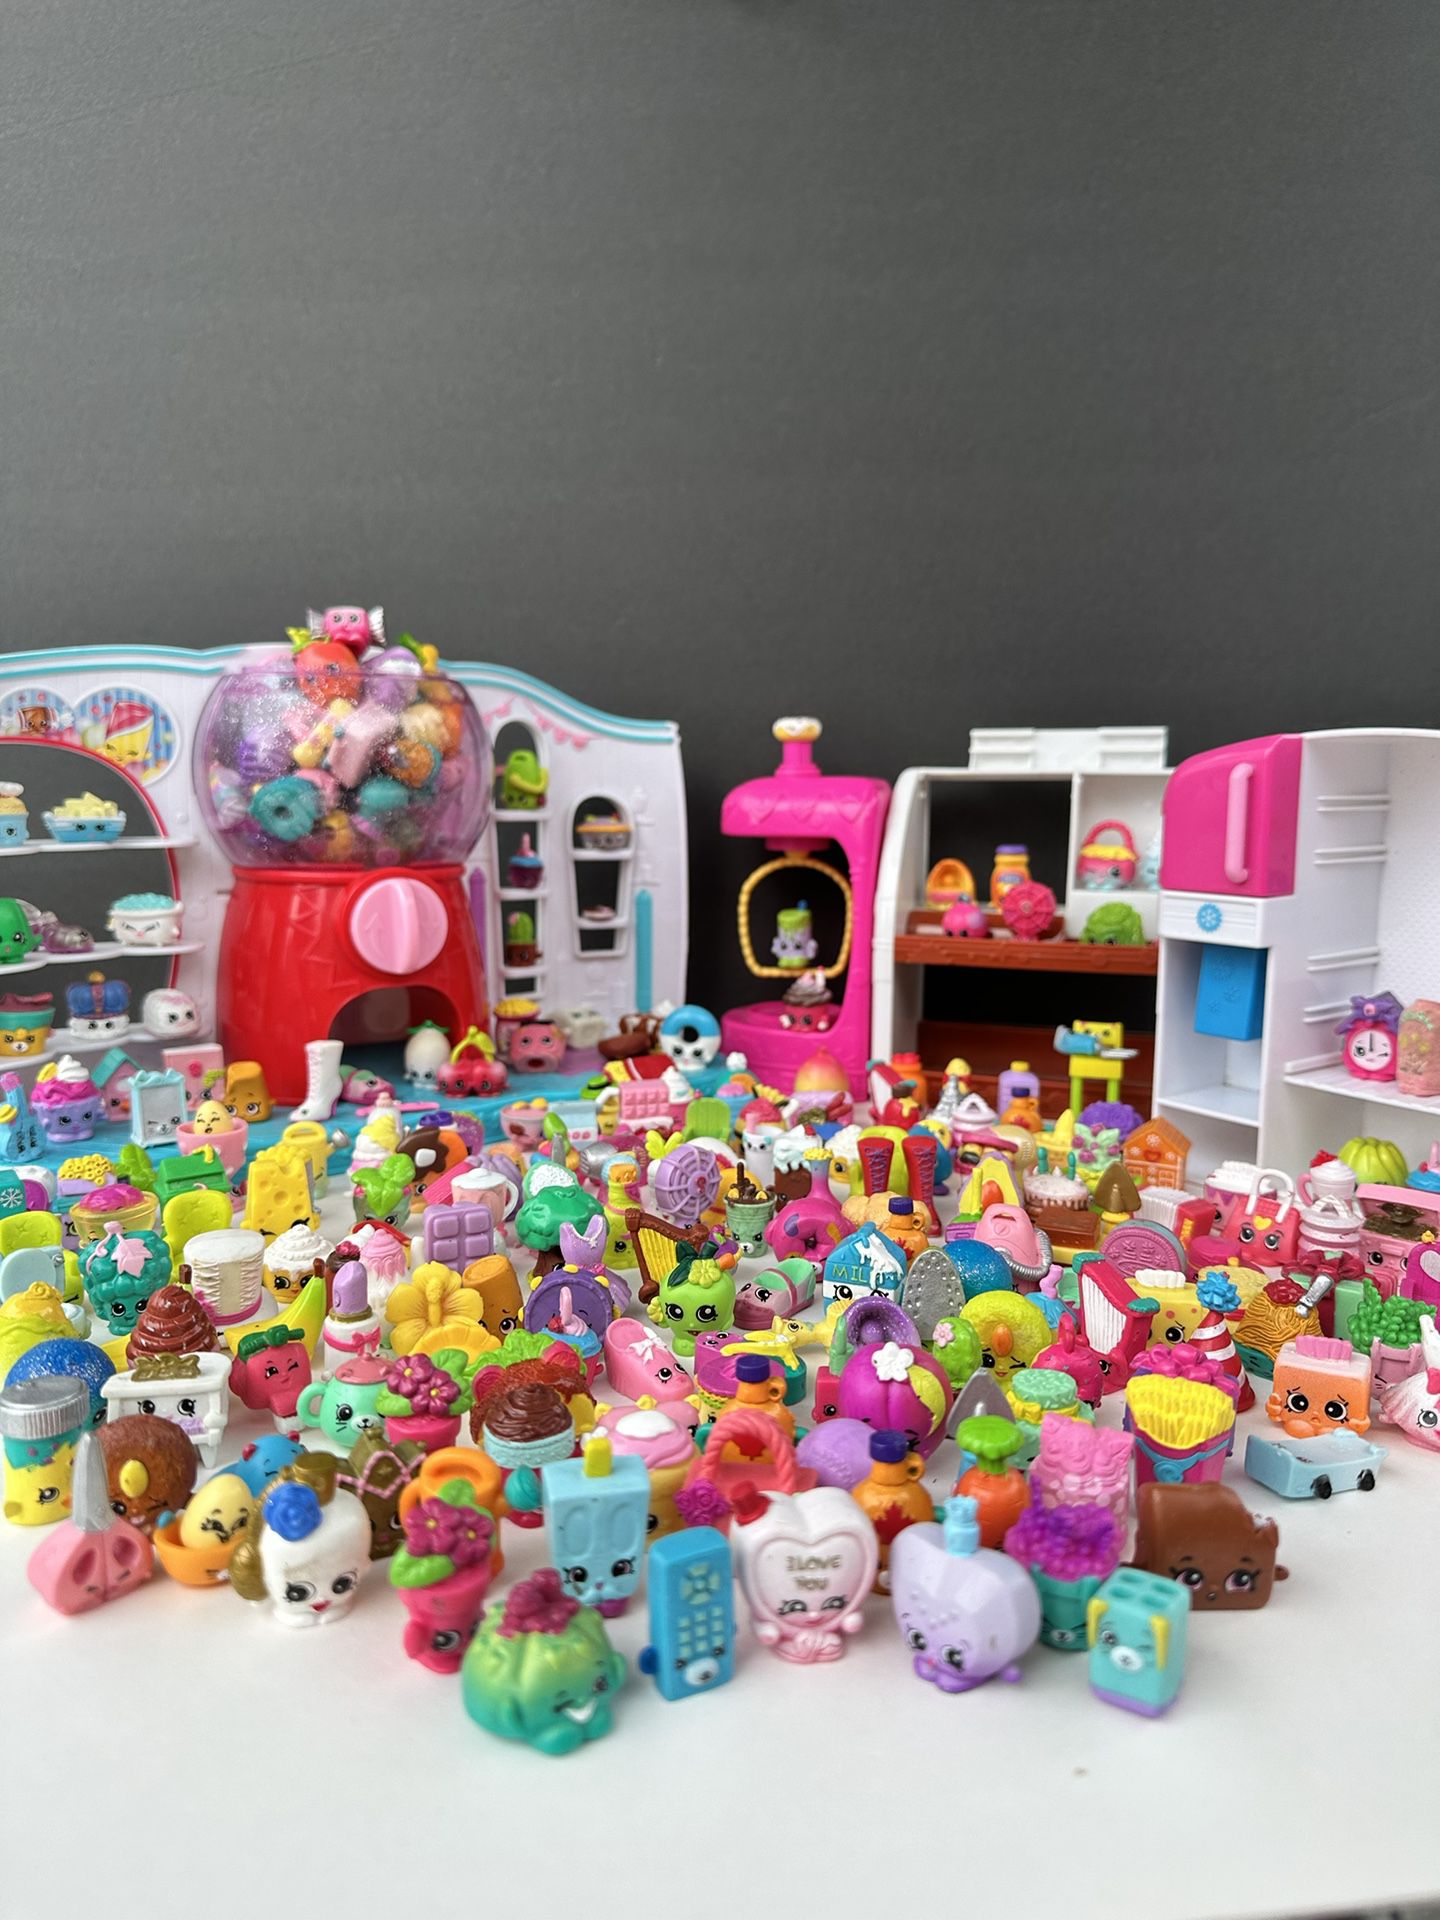 Colossal Bundle Of SHOPKINS TOYS 380+ Pieces - Figures, Houses, Dolls, Shops, So Much!!